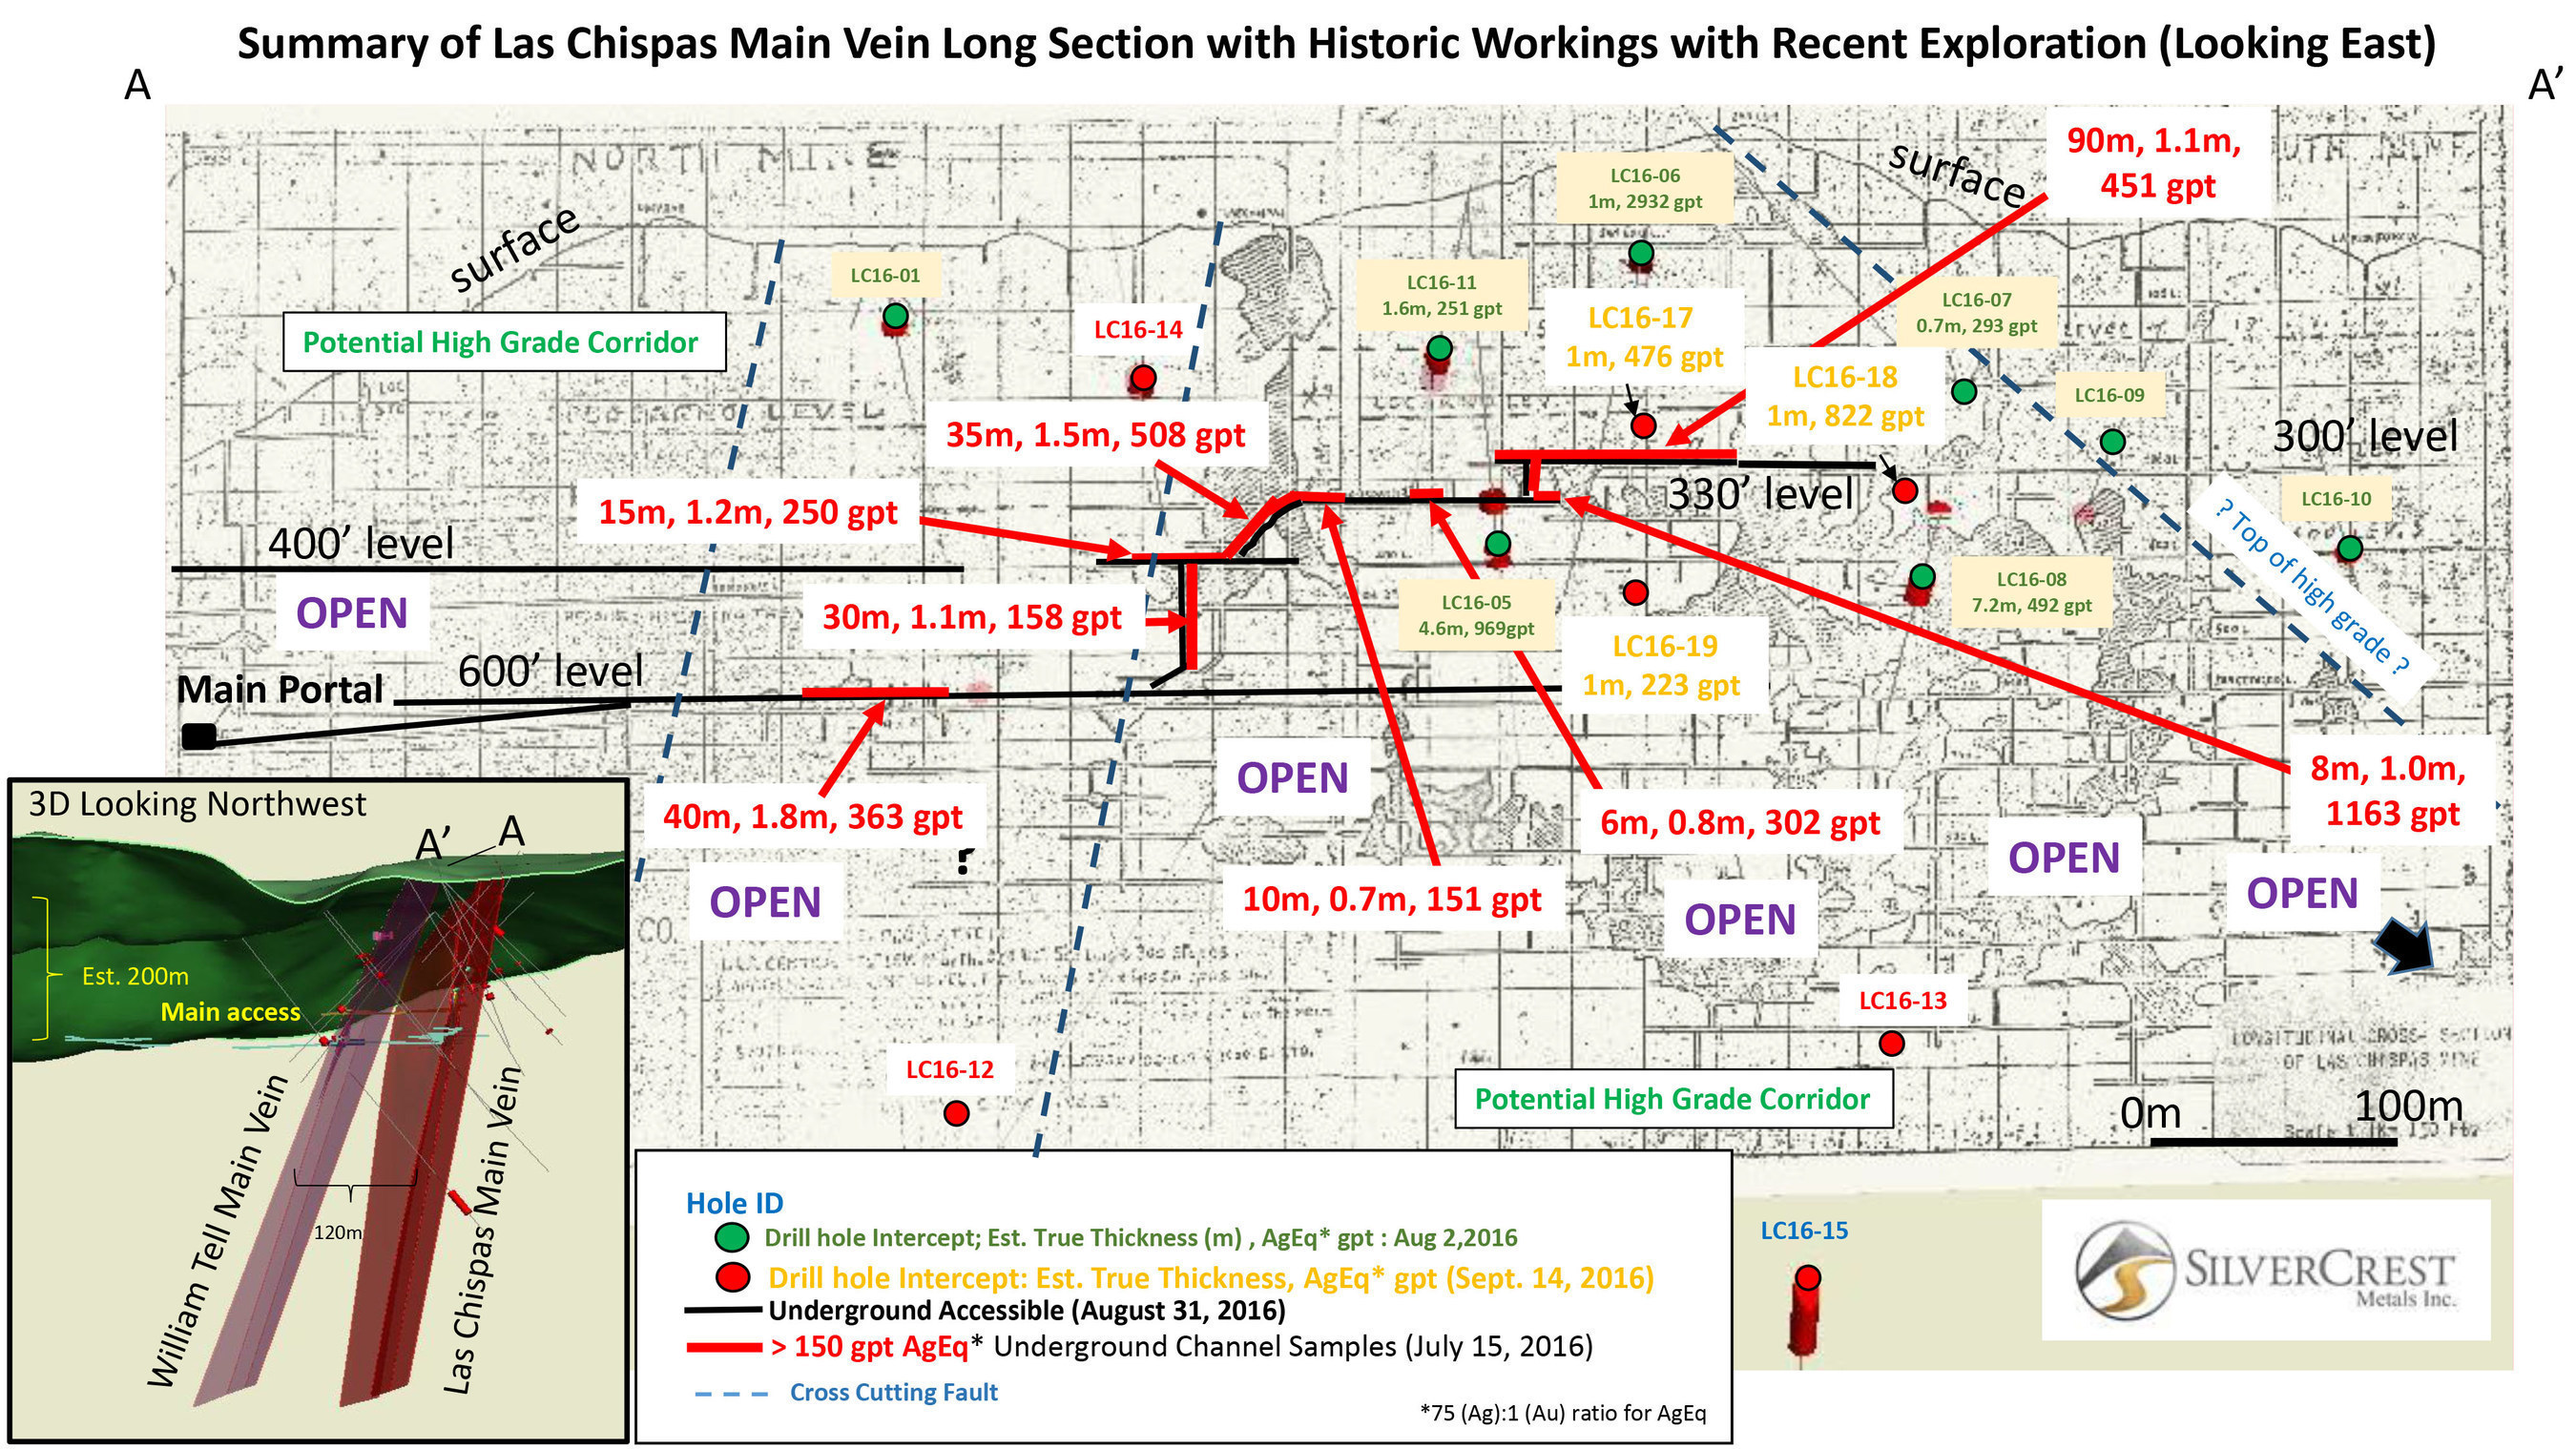 SilverCrest Metals Inc. Sonora, Mexico - Las Chispas Project - Figure 2 - Summary of Las Chispas Main Vein Long Section with Historic Workings with Recent Exploration (Looking East)